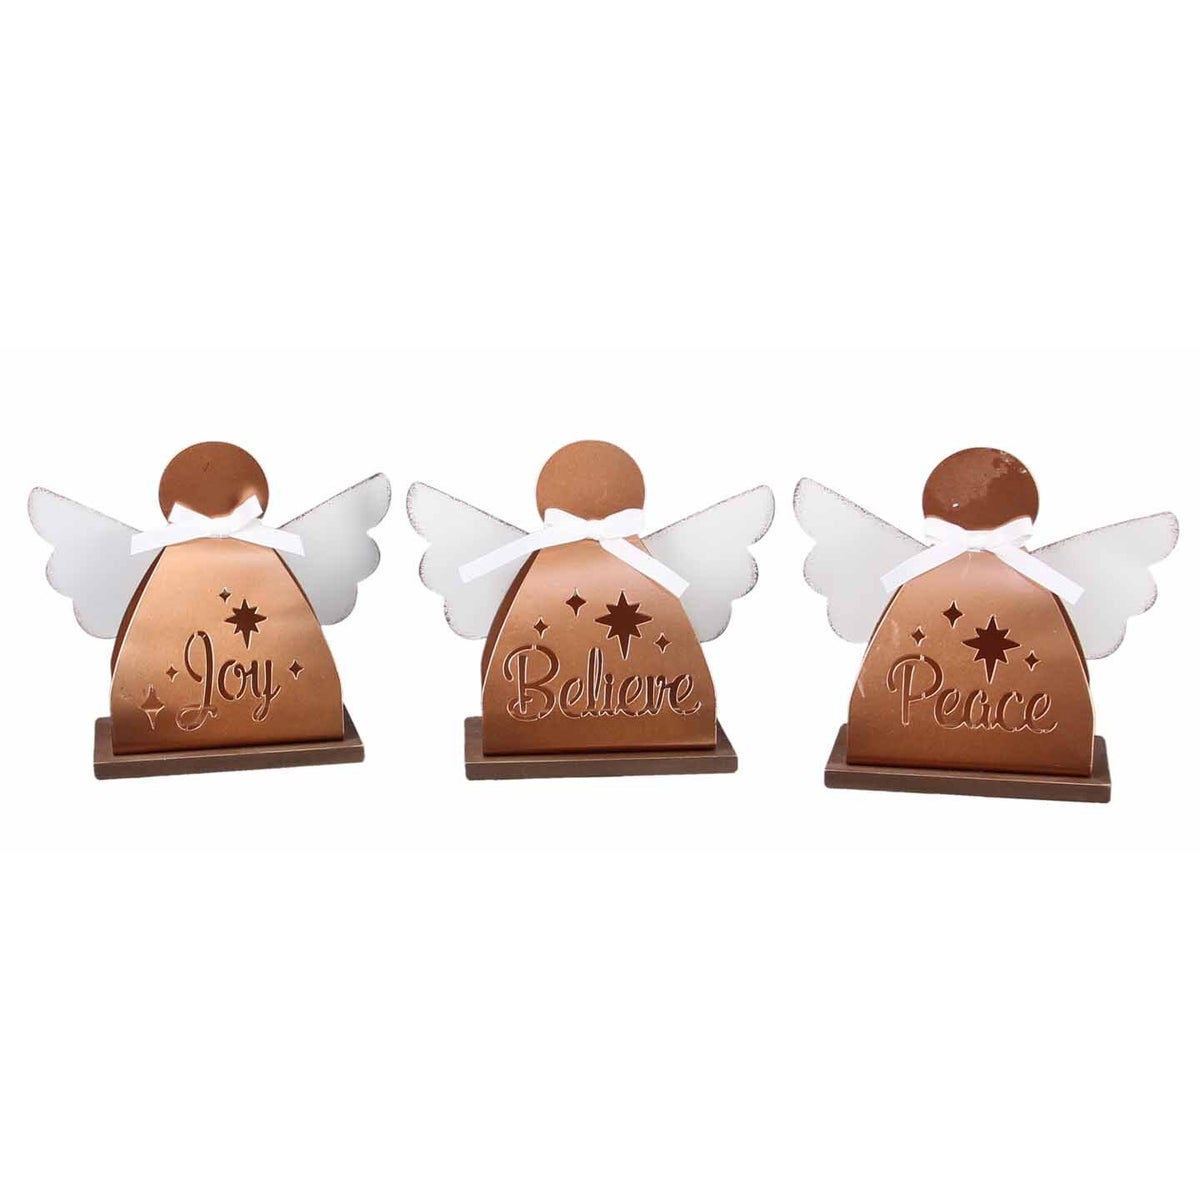 Tin Christmas Tabletop Angel with Laser Cutout Designs on Wood Base, 3 assorted